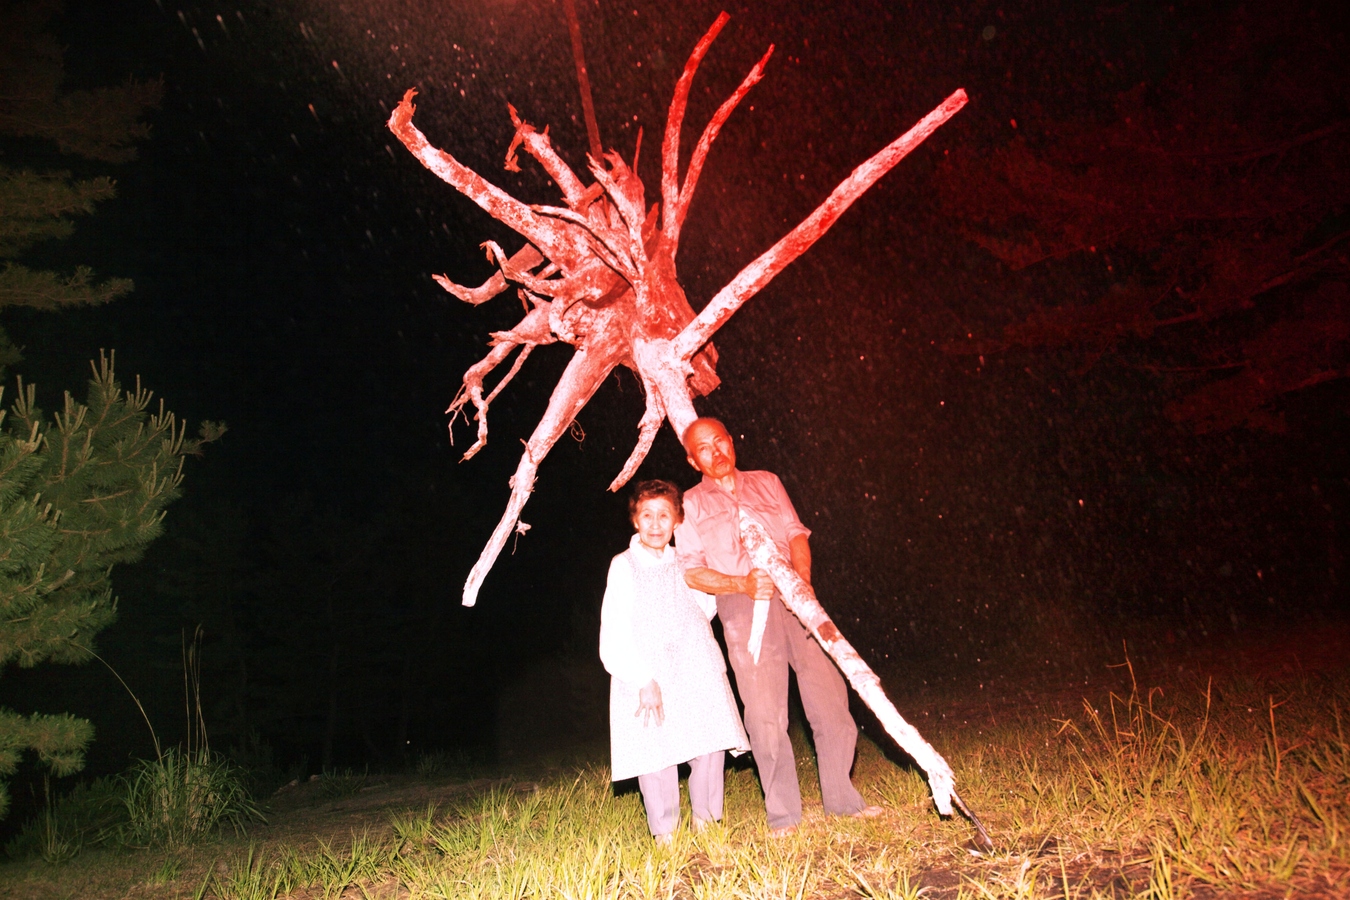 Portrait of Cultivation, 2012 from the RASEN KAIGAN series, 2012